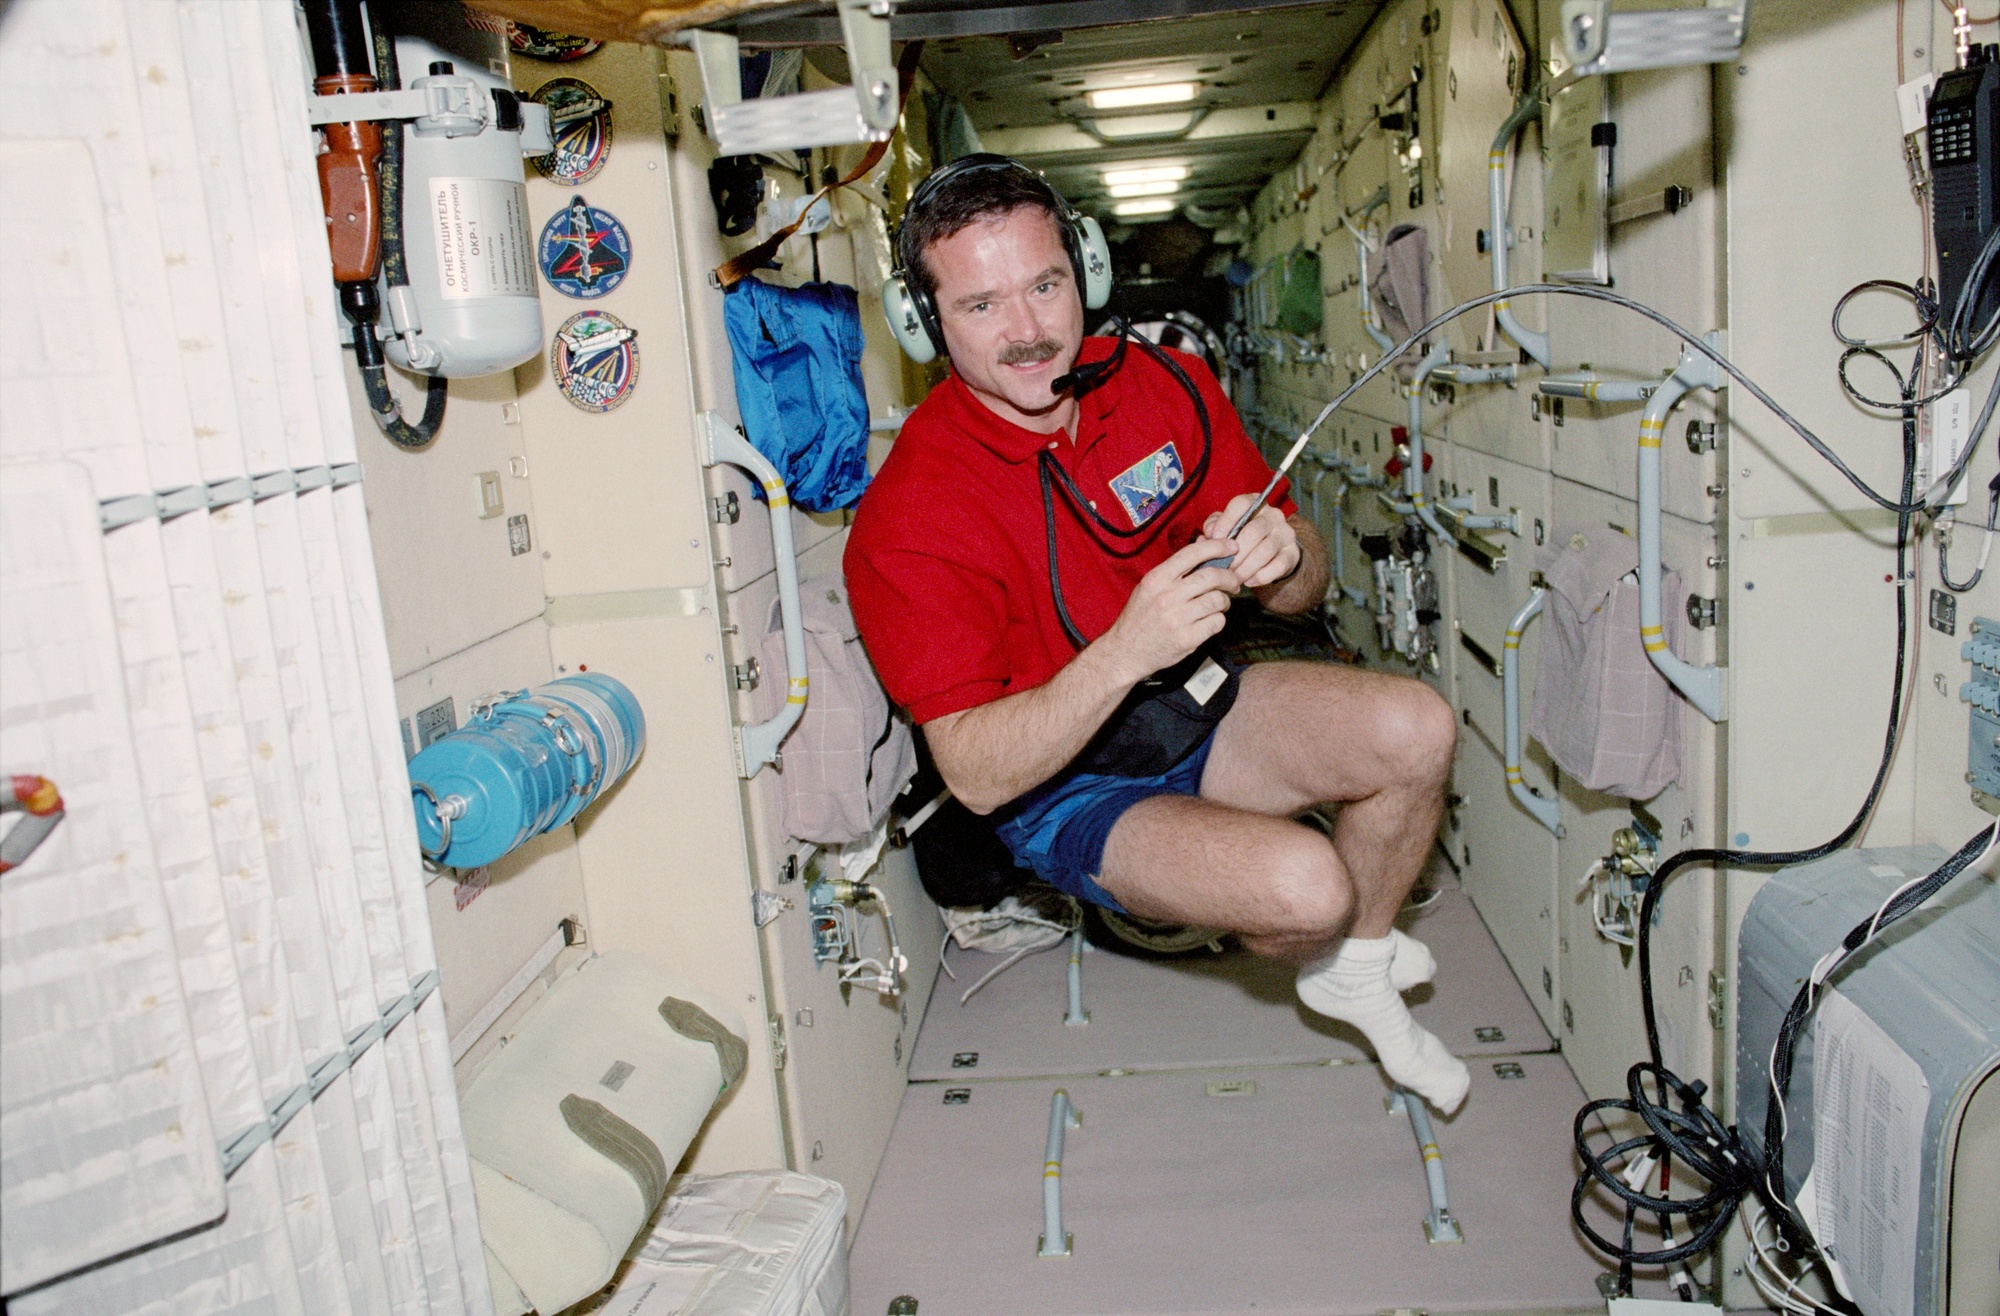 Images - MS Hadfield uses the HAM radio in Zarya during STS-100 pic